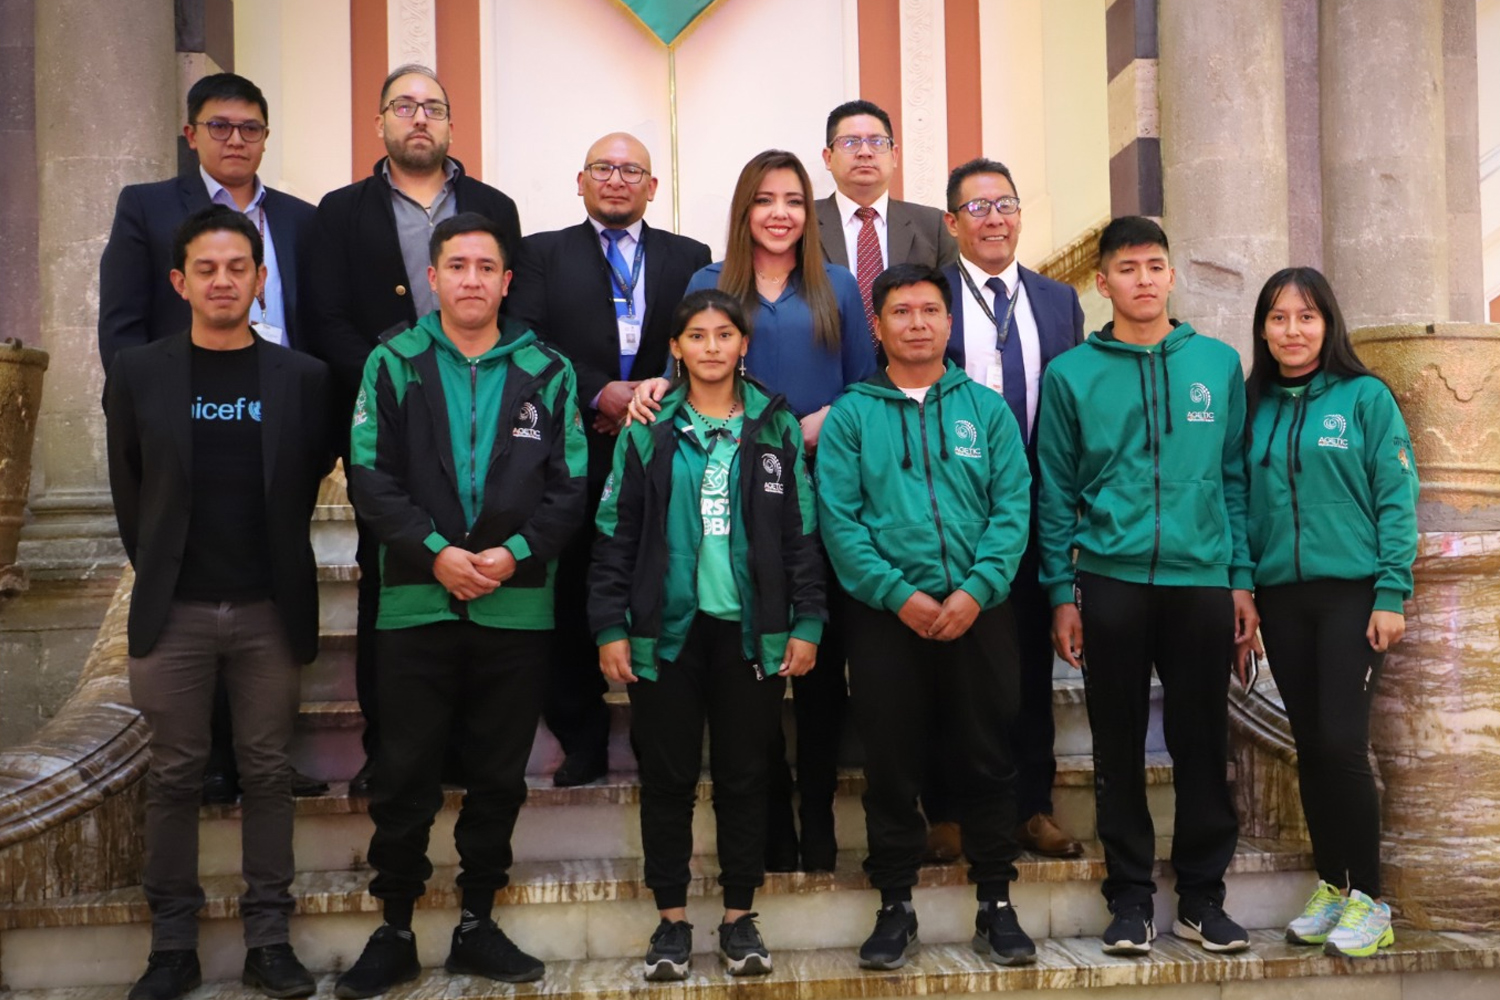 AGETIC LANZA FIRST BOLIVIA RUMBO AL FIRST GLOBAL CHALLENGE EN ATENAS